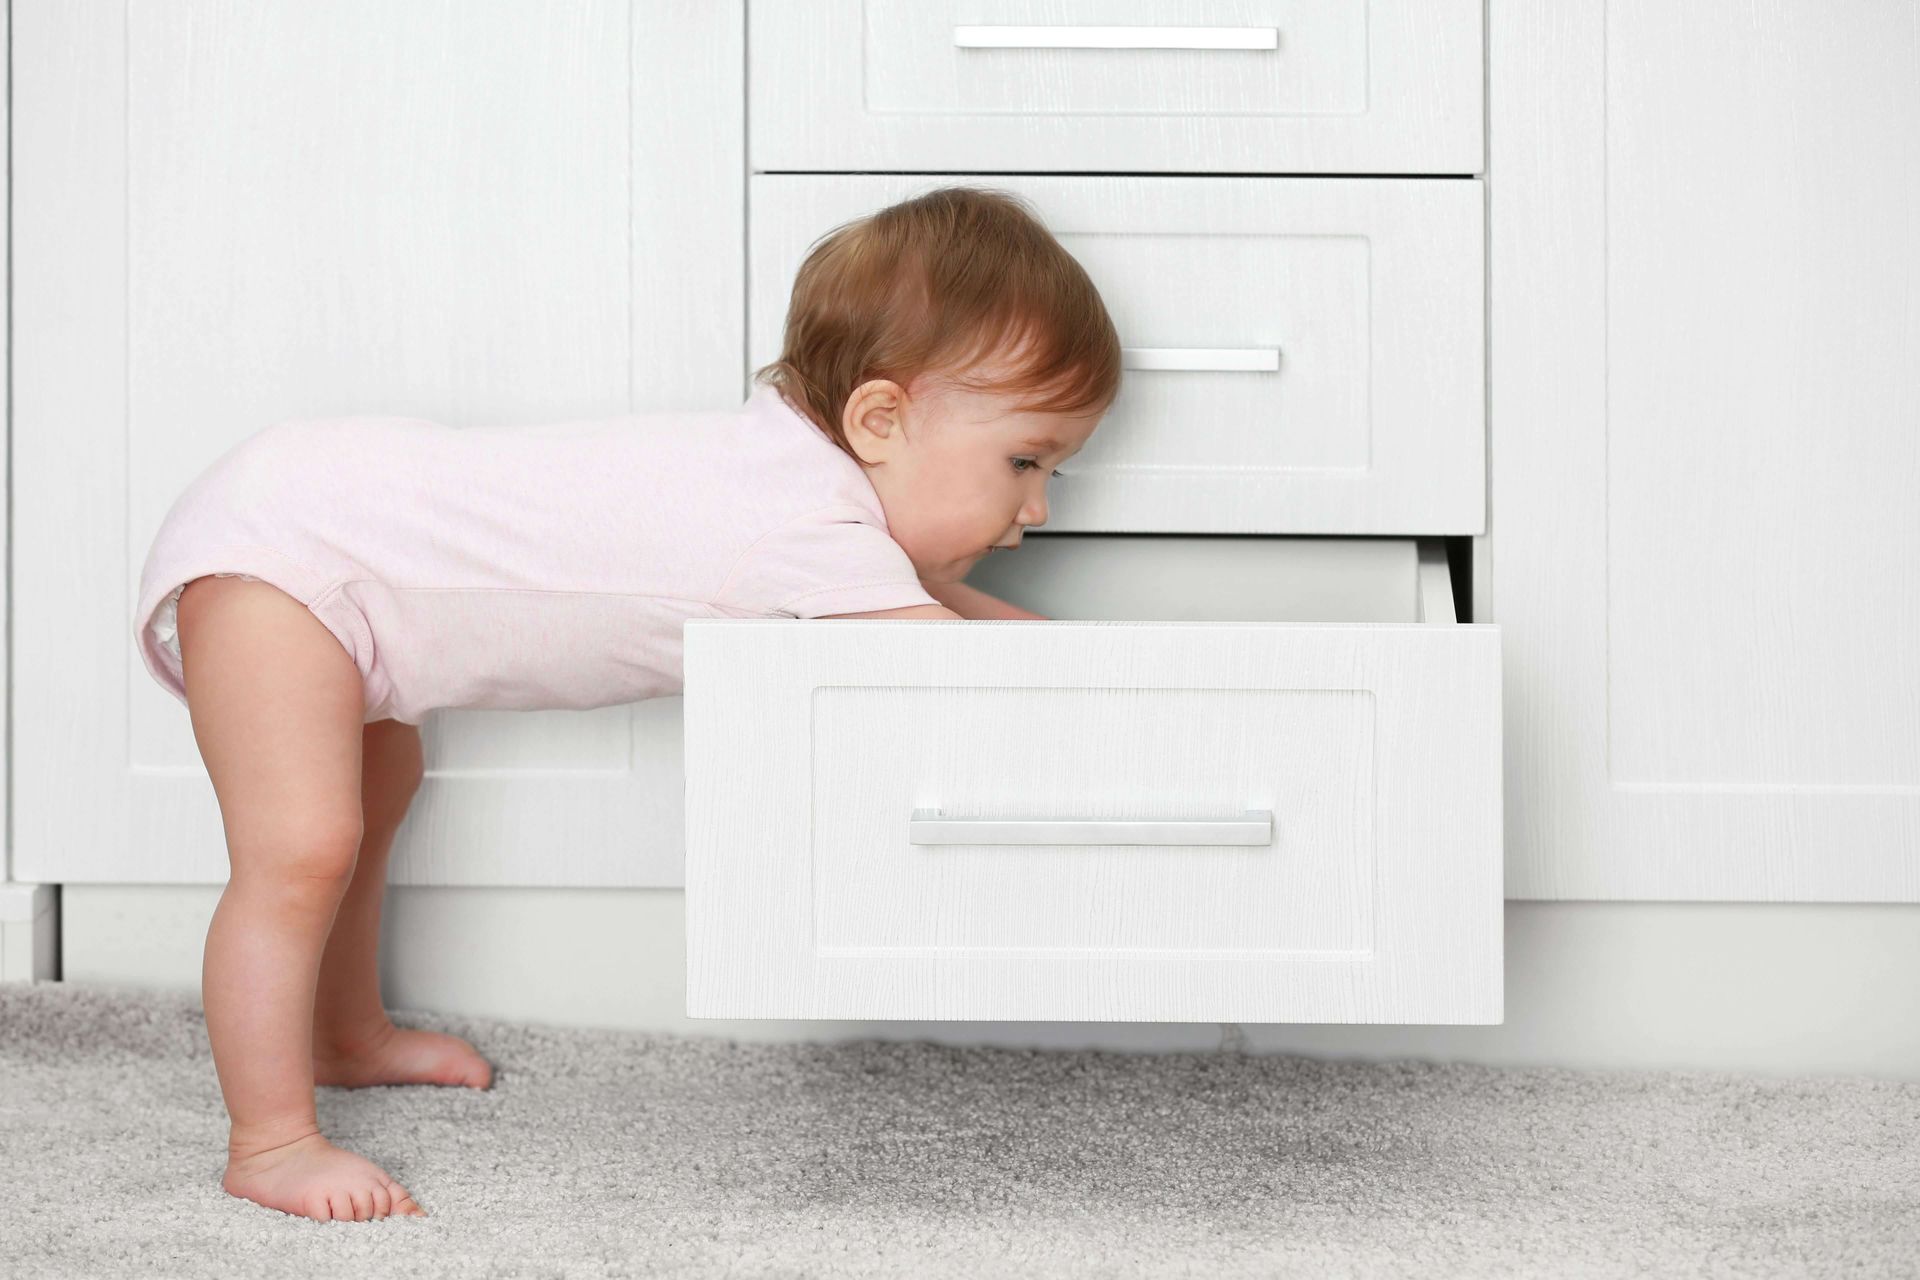 baby proofing pros cary nc, baby proofing service in raleigh north carolina, cabinet latching